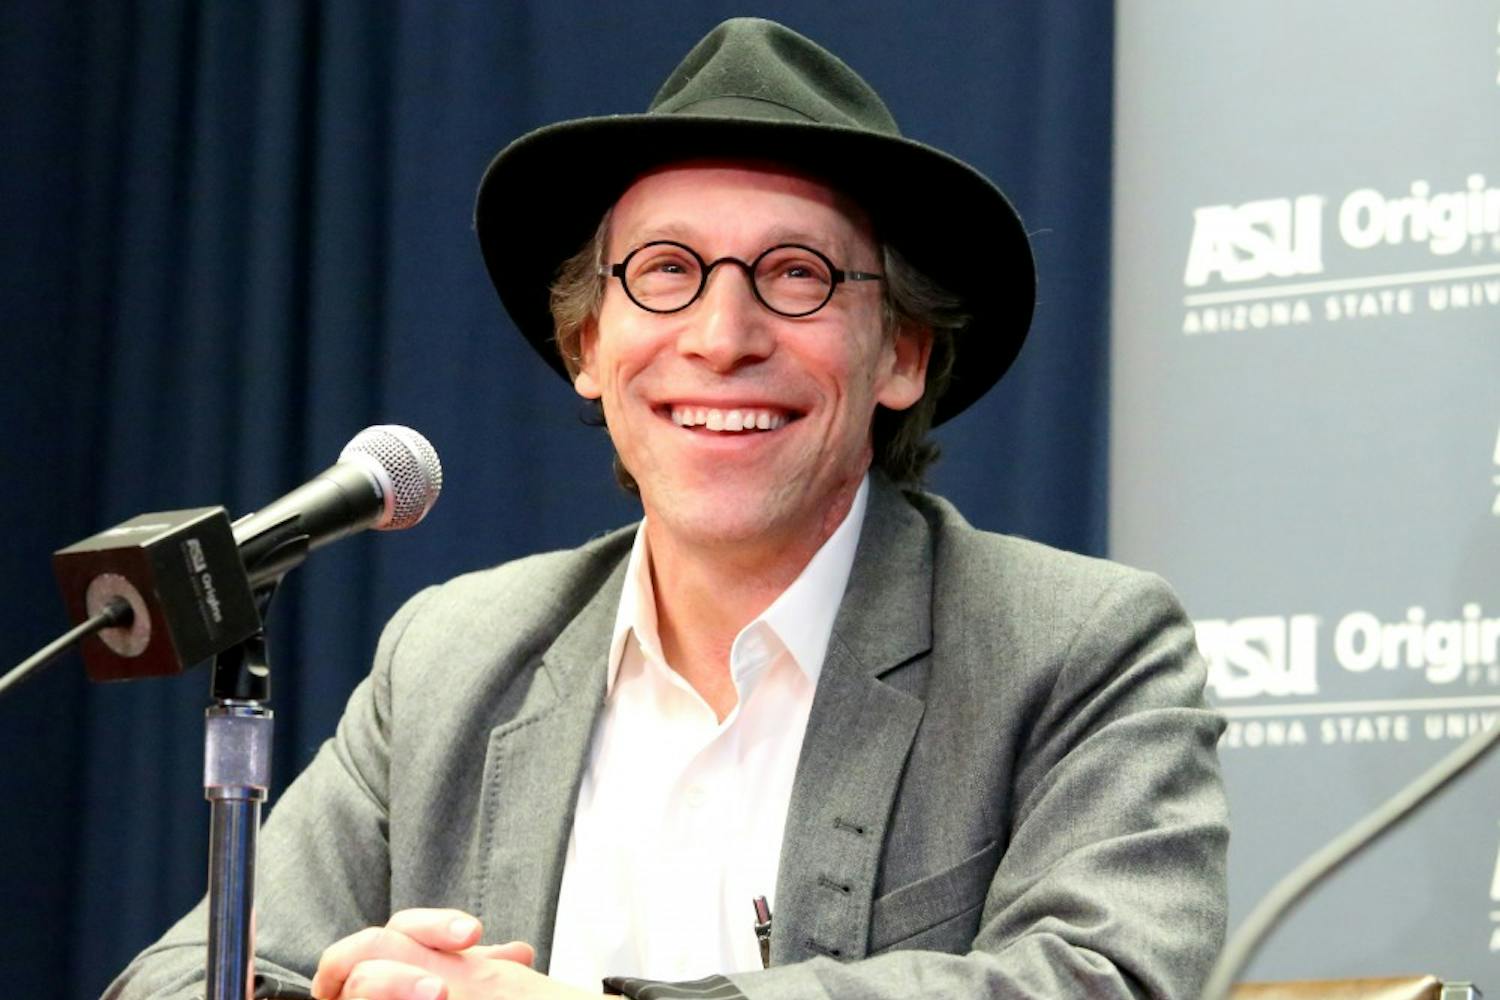 Lawrence Krauss speaks&nbsp;at the Media Q&A session before his dialogue with Johnny Depp 'Finding Creativity in Madness' at ASU Gammage on Saturday, March 12, 2016, as a part of the Origins Project.